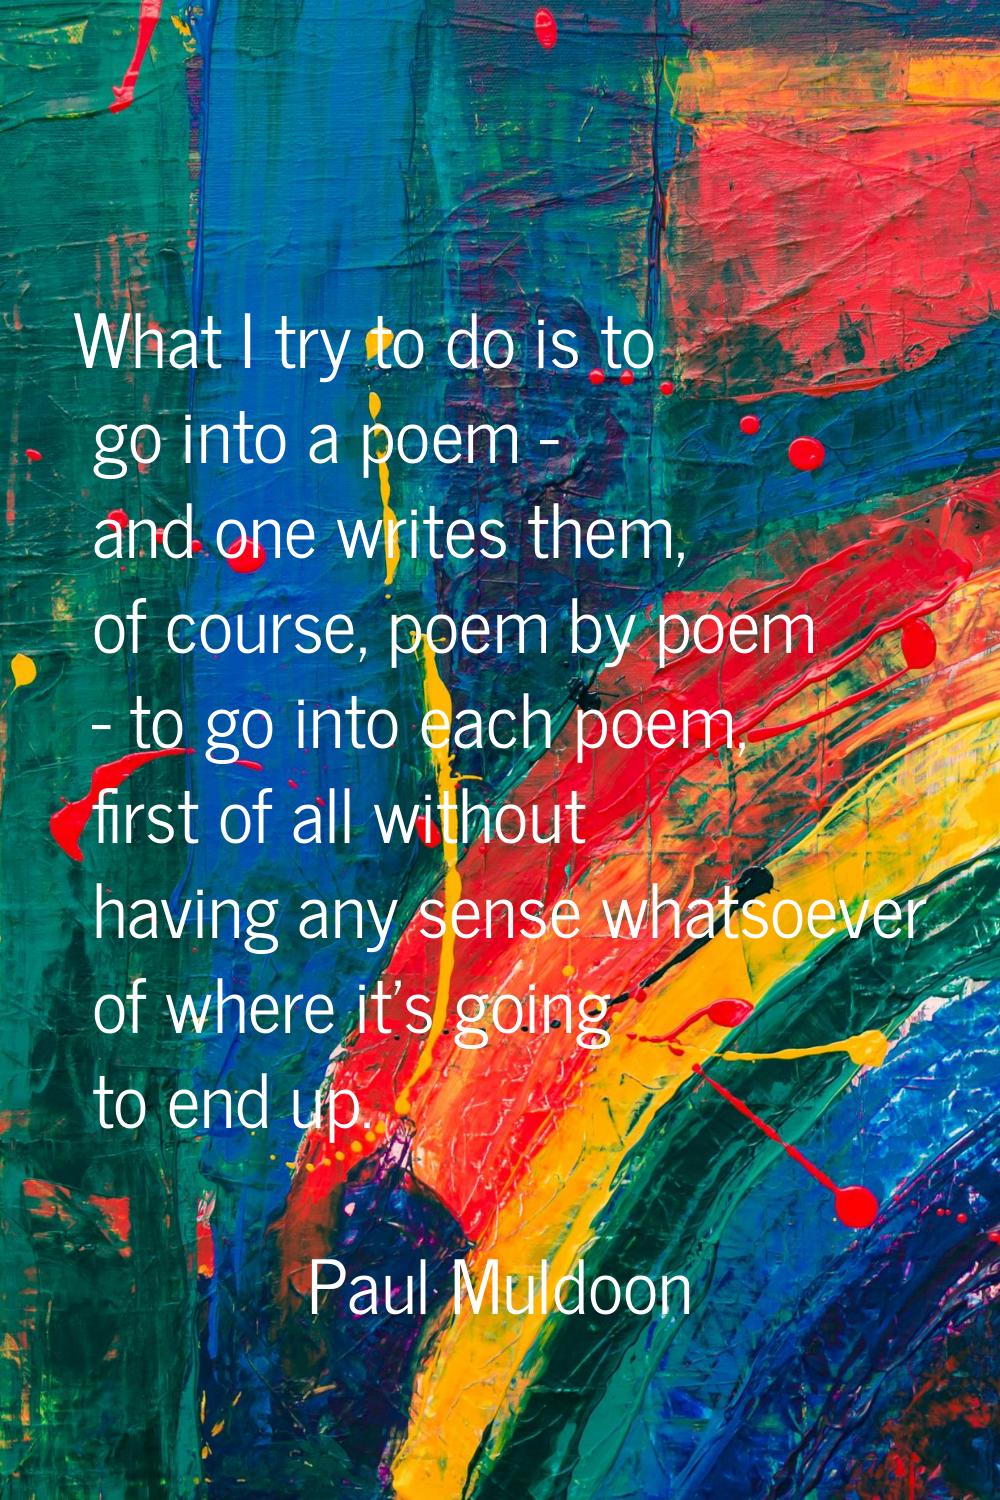 What I try to do is to go into a poem - and one writes them, of course, poem by poem - to go into e